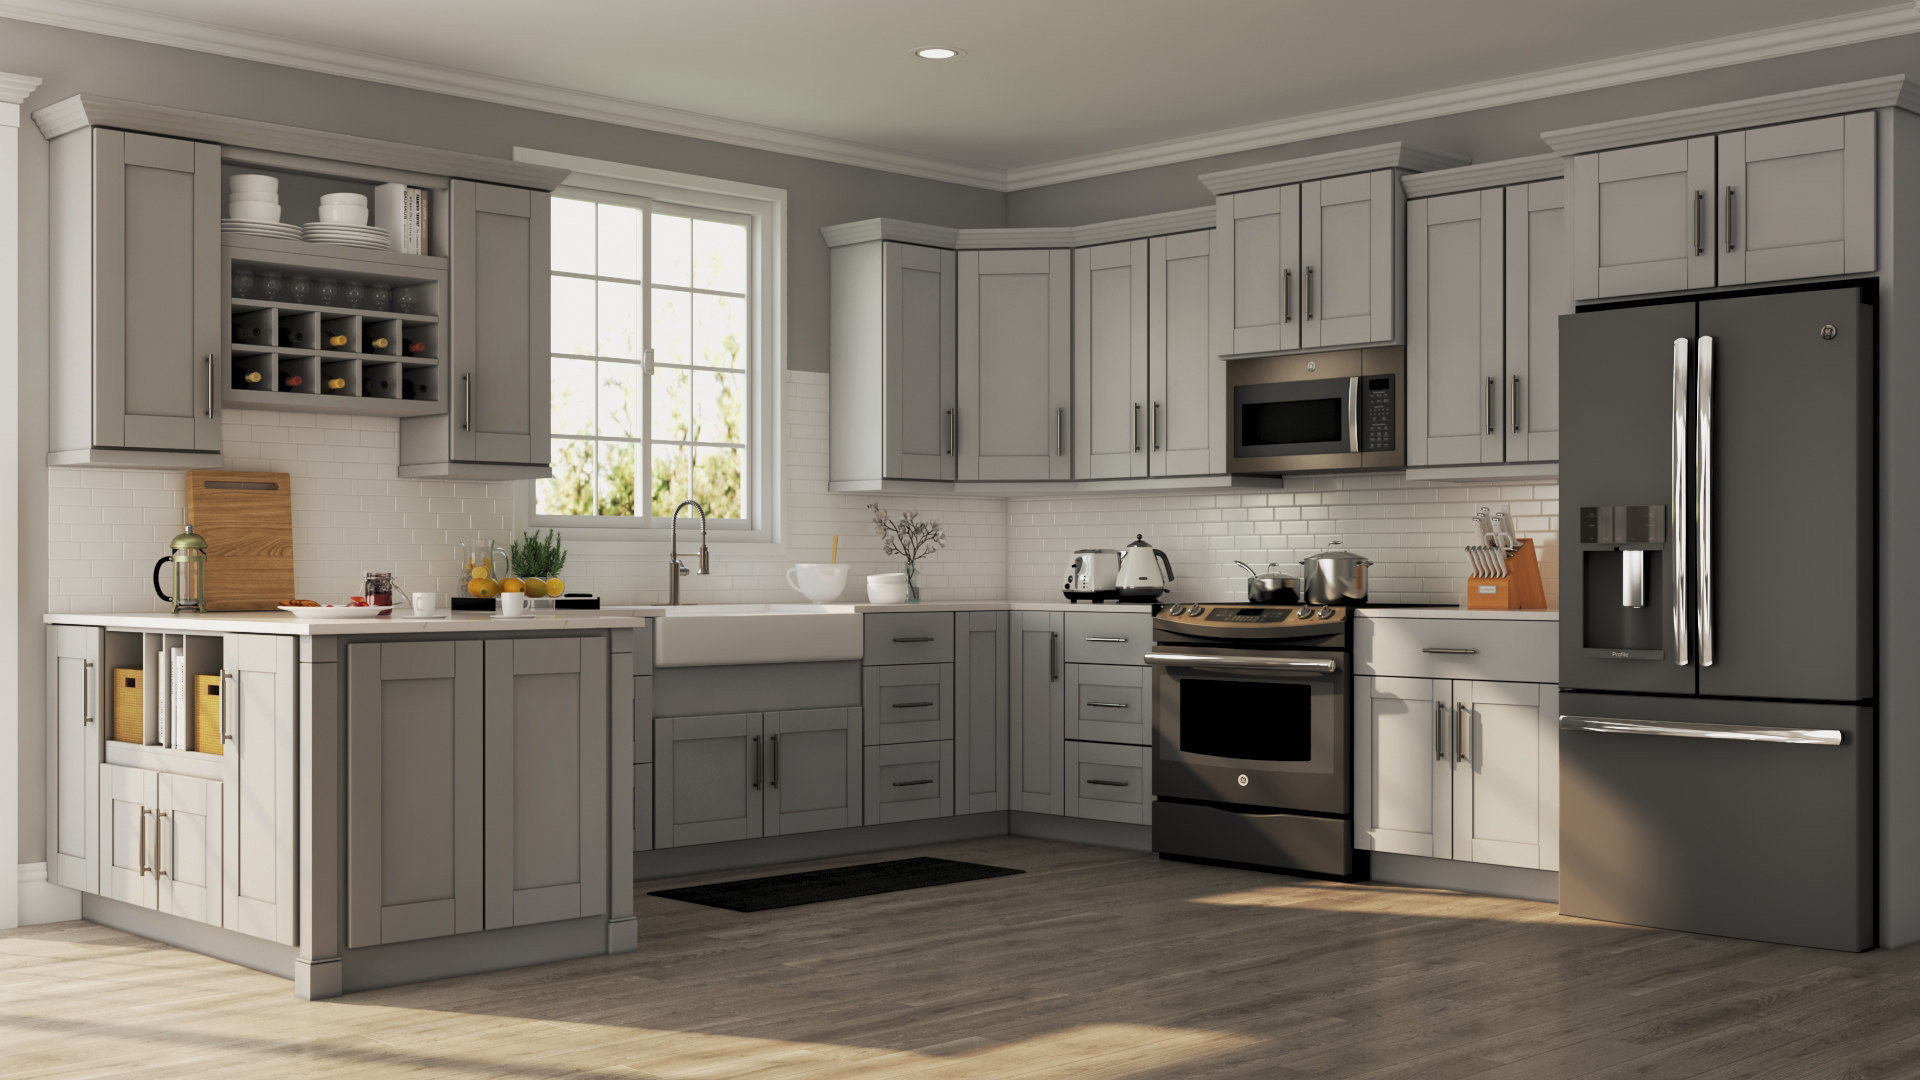 Homedepot Kitchen Cabinets
 Shaker Wall Cabinets in Dove Gray – Kitchen – The Home Depot